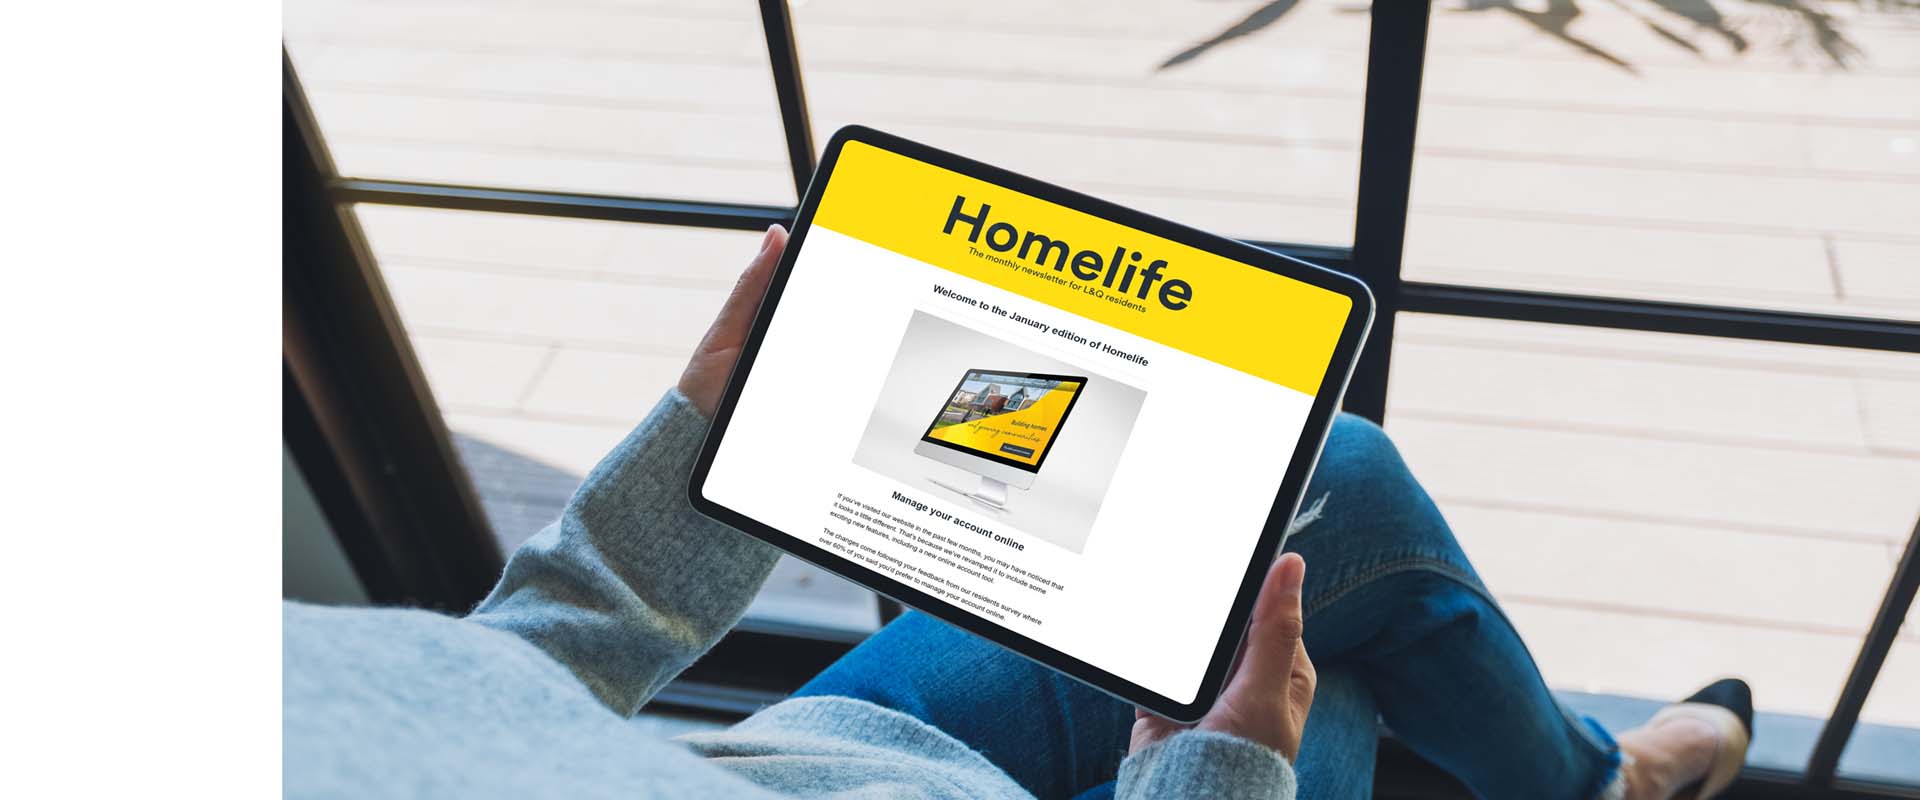 Person reading Homelife on a tablet device